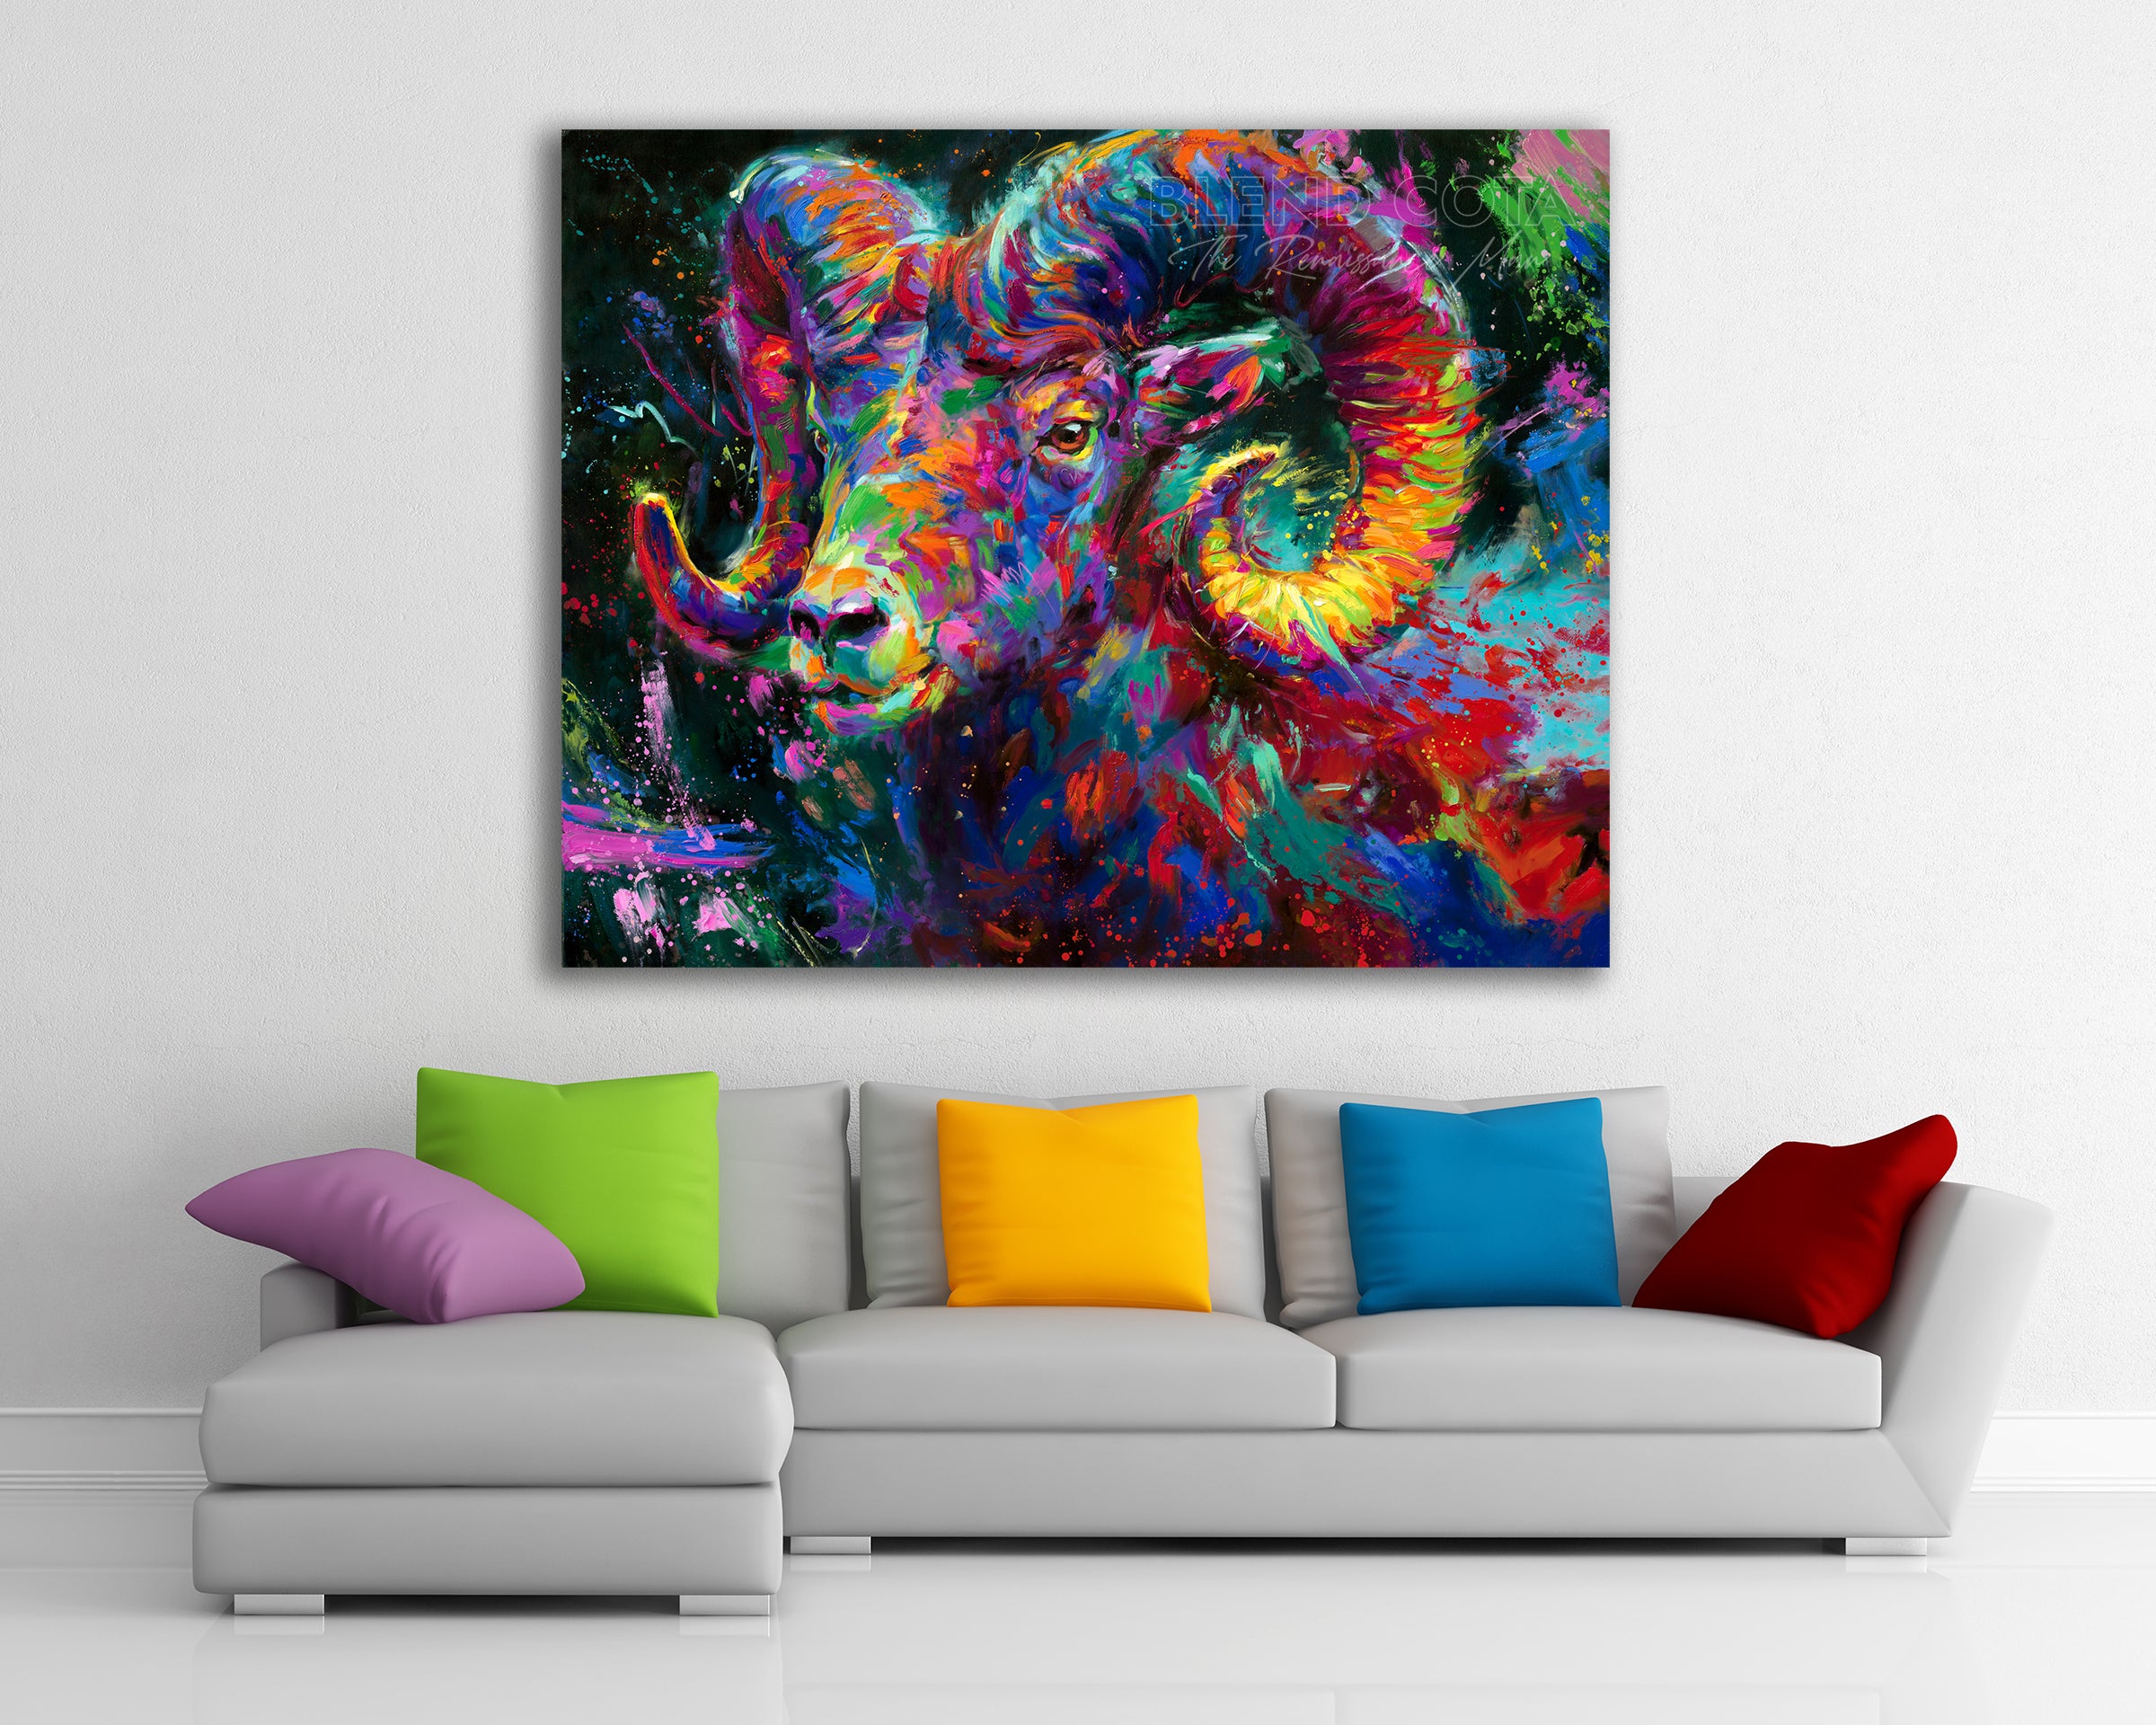 The Ram Spirit painted by Blend Cota Limited Edition Art Framed on Canvas from Blend Cota Studios with painting hanging on a white wall behind a colorful couch